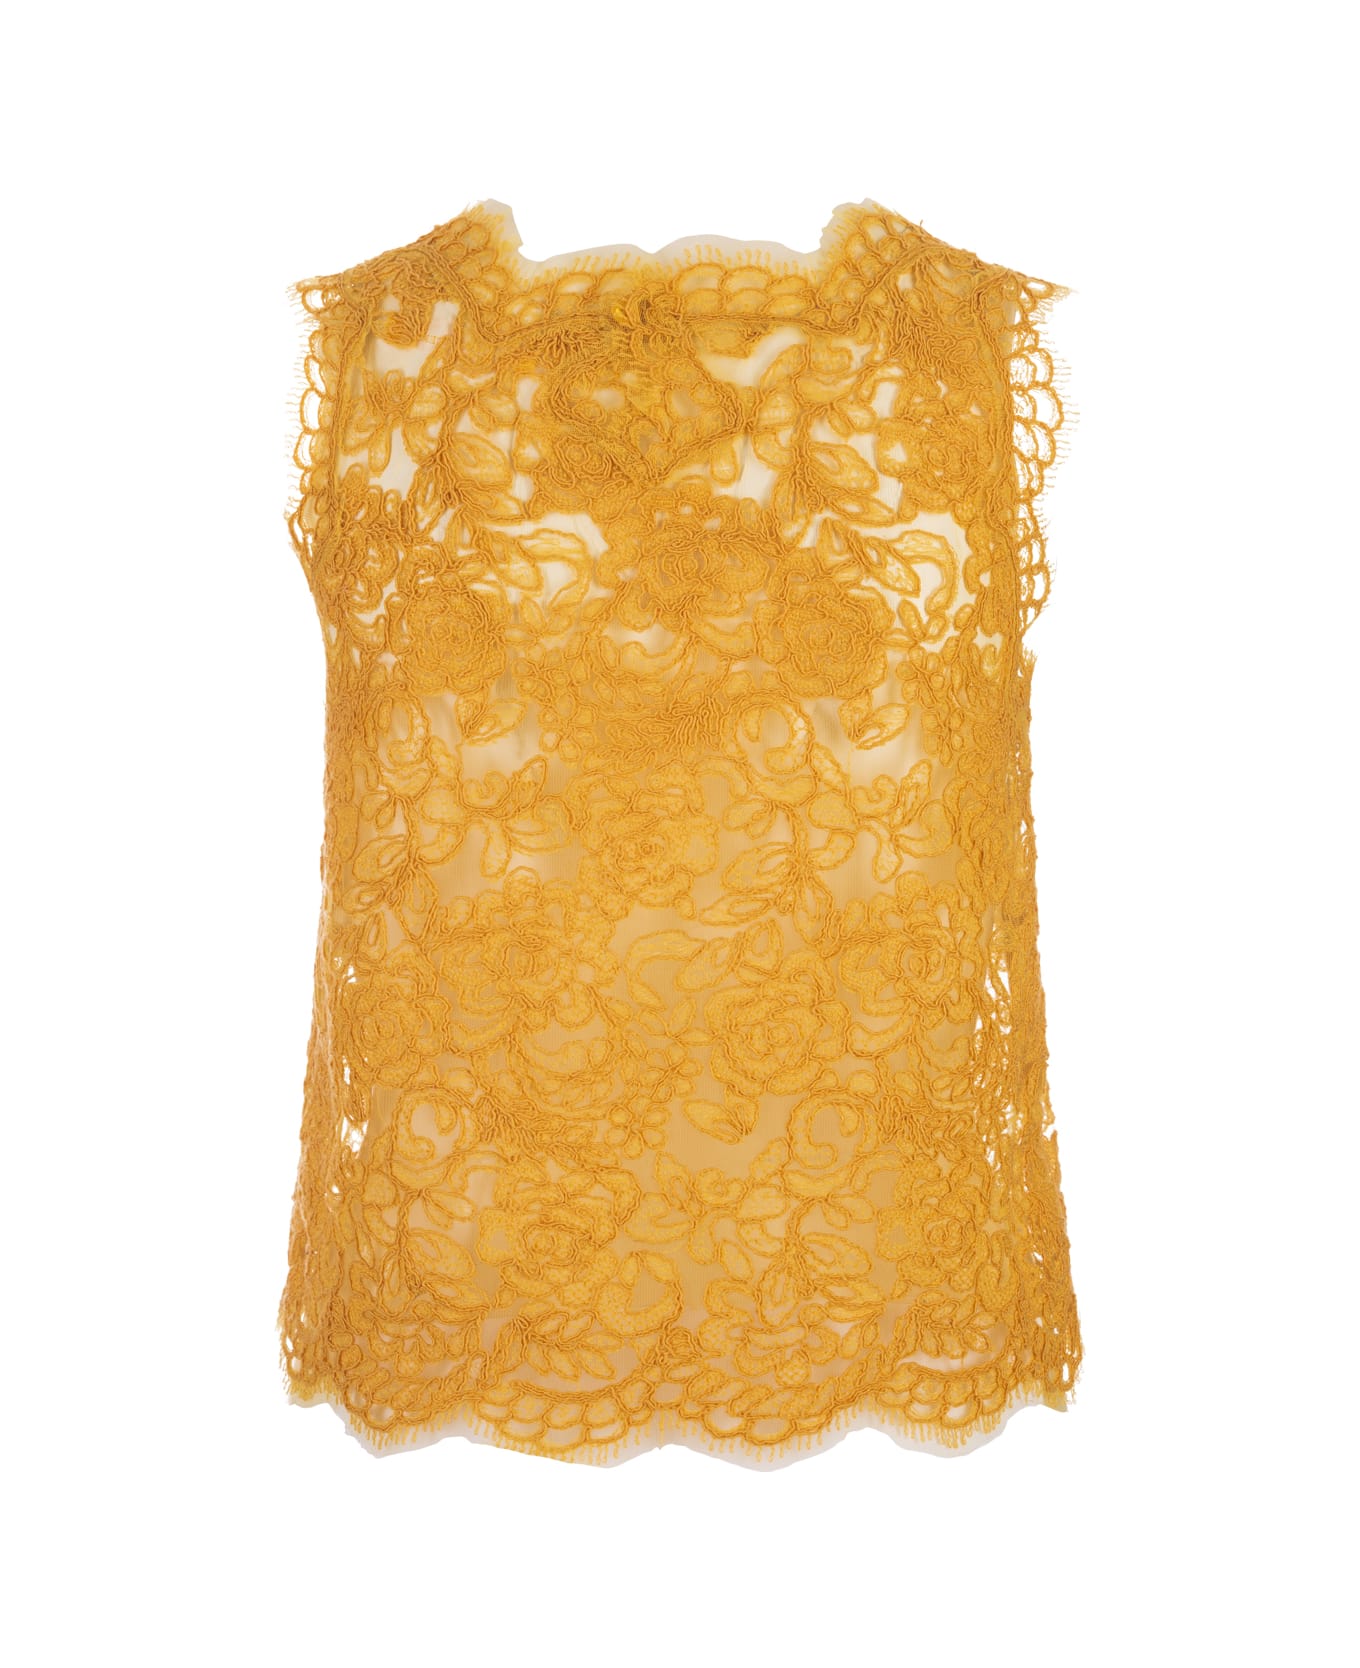 Ermanno Scervino Sleeveless Top In Yellow-orange Floral Lace - Yellow